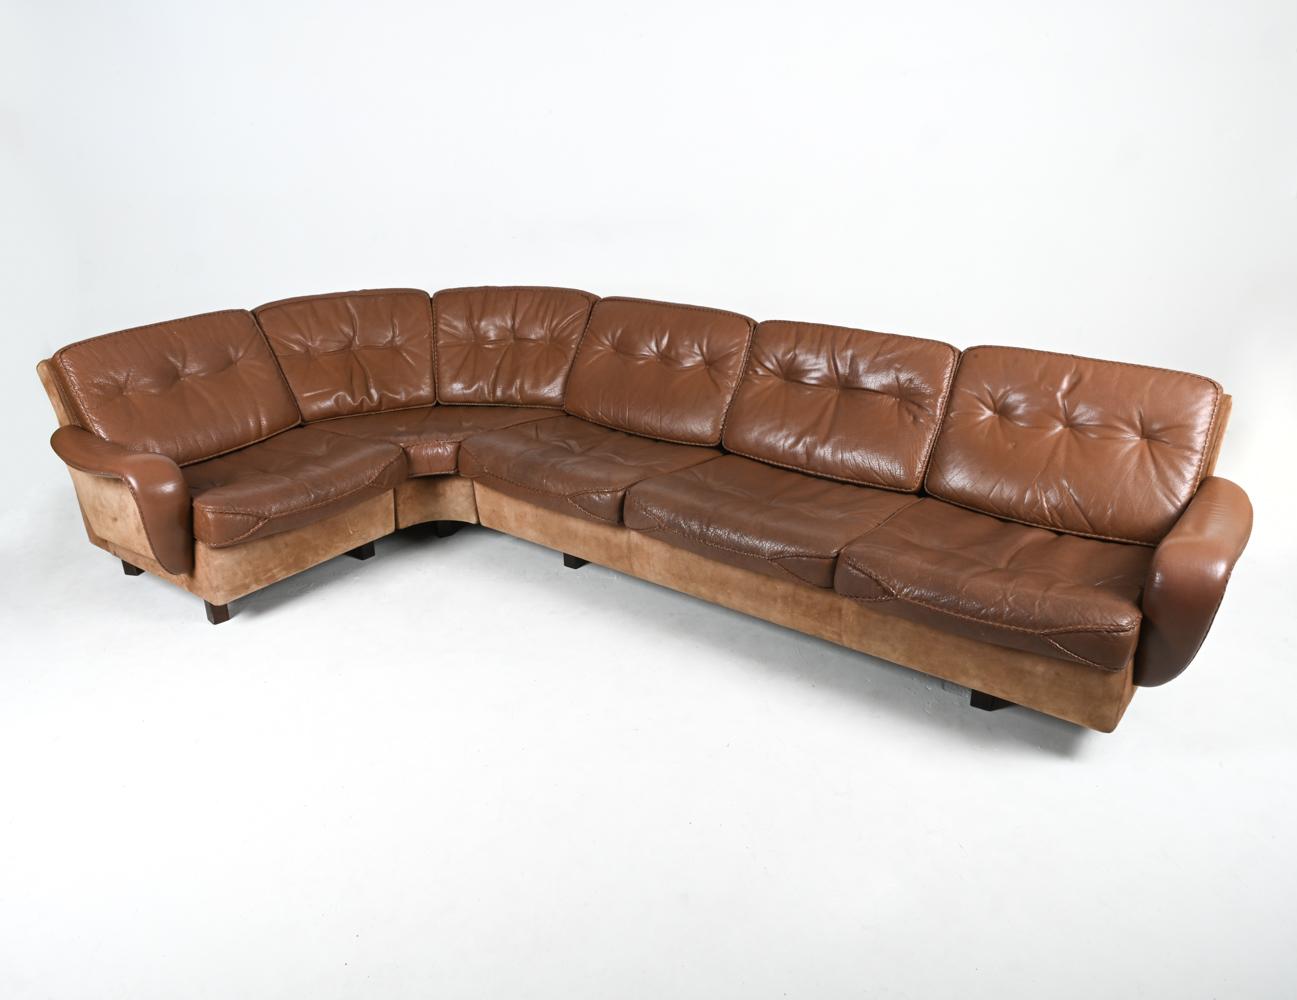 Furnish the ultimate Scandinavian Modern lounge with this rare sectional sofa by the Danish design team of Ib Madsen and Acton Schubell. Finished in luxurious brown suede and buffalo leather for a subtle colorblocked look, this sofa features bold